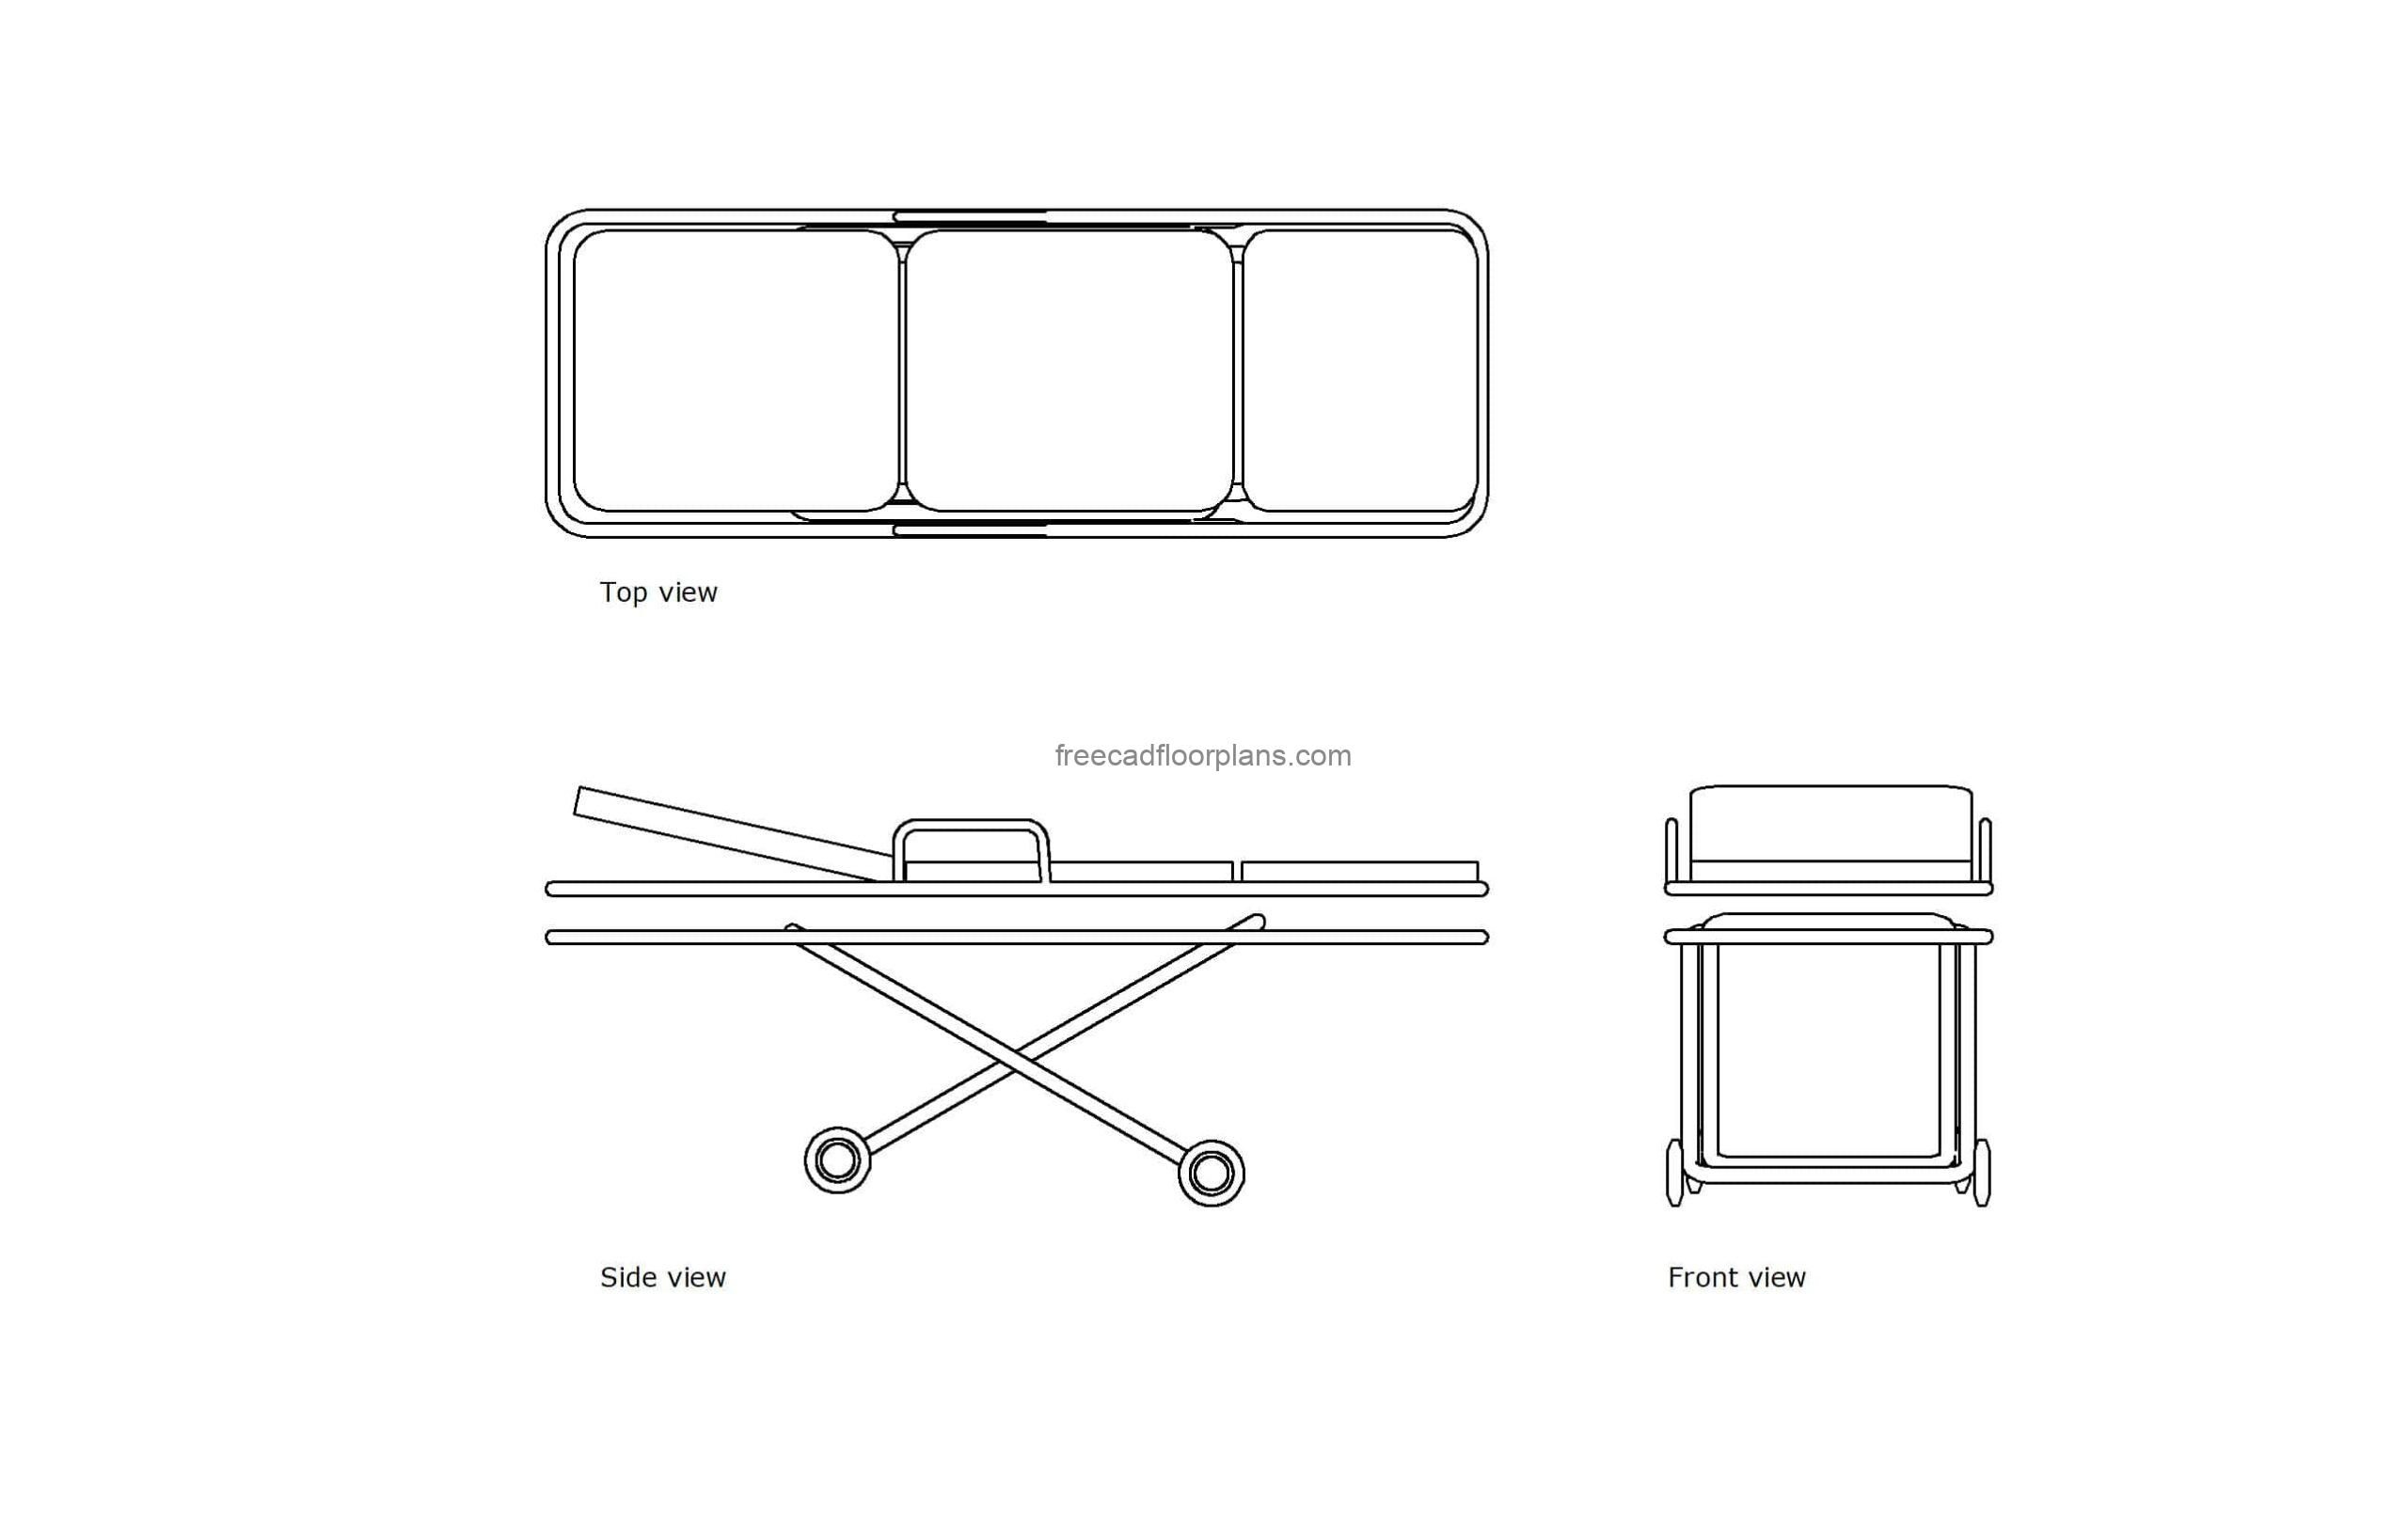 autocad drawing of an ambulance stretcher, plan and elevation 2d views, dwg file free for download